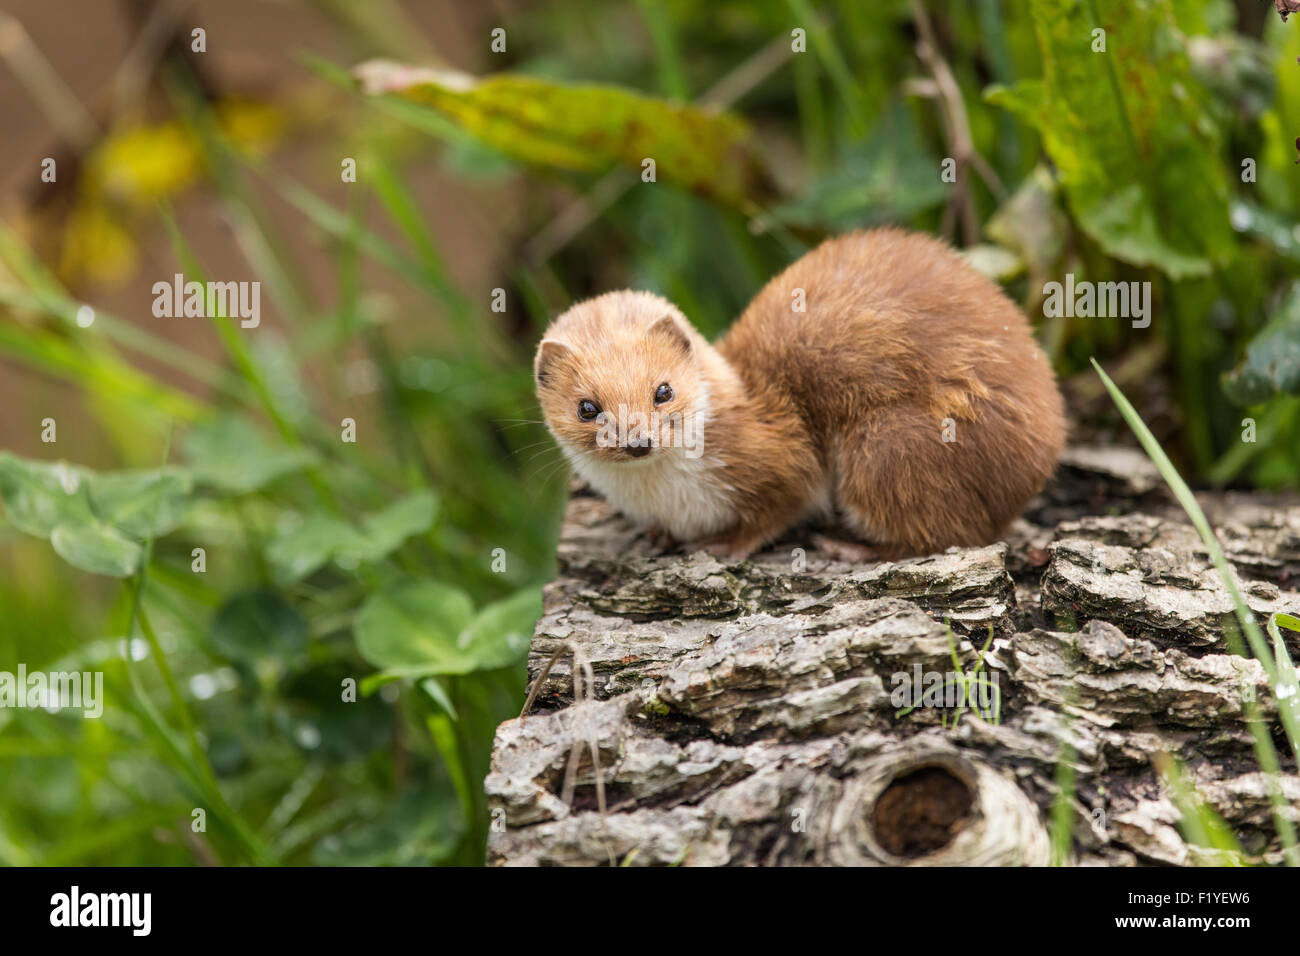 Weasel on a log with out of focus foliage in the background. The weasel is very small and Britain's smallest carnivore Stock Photo